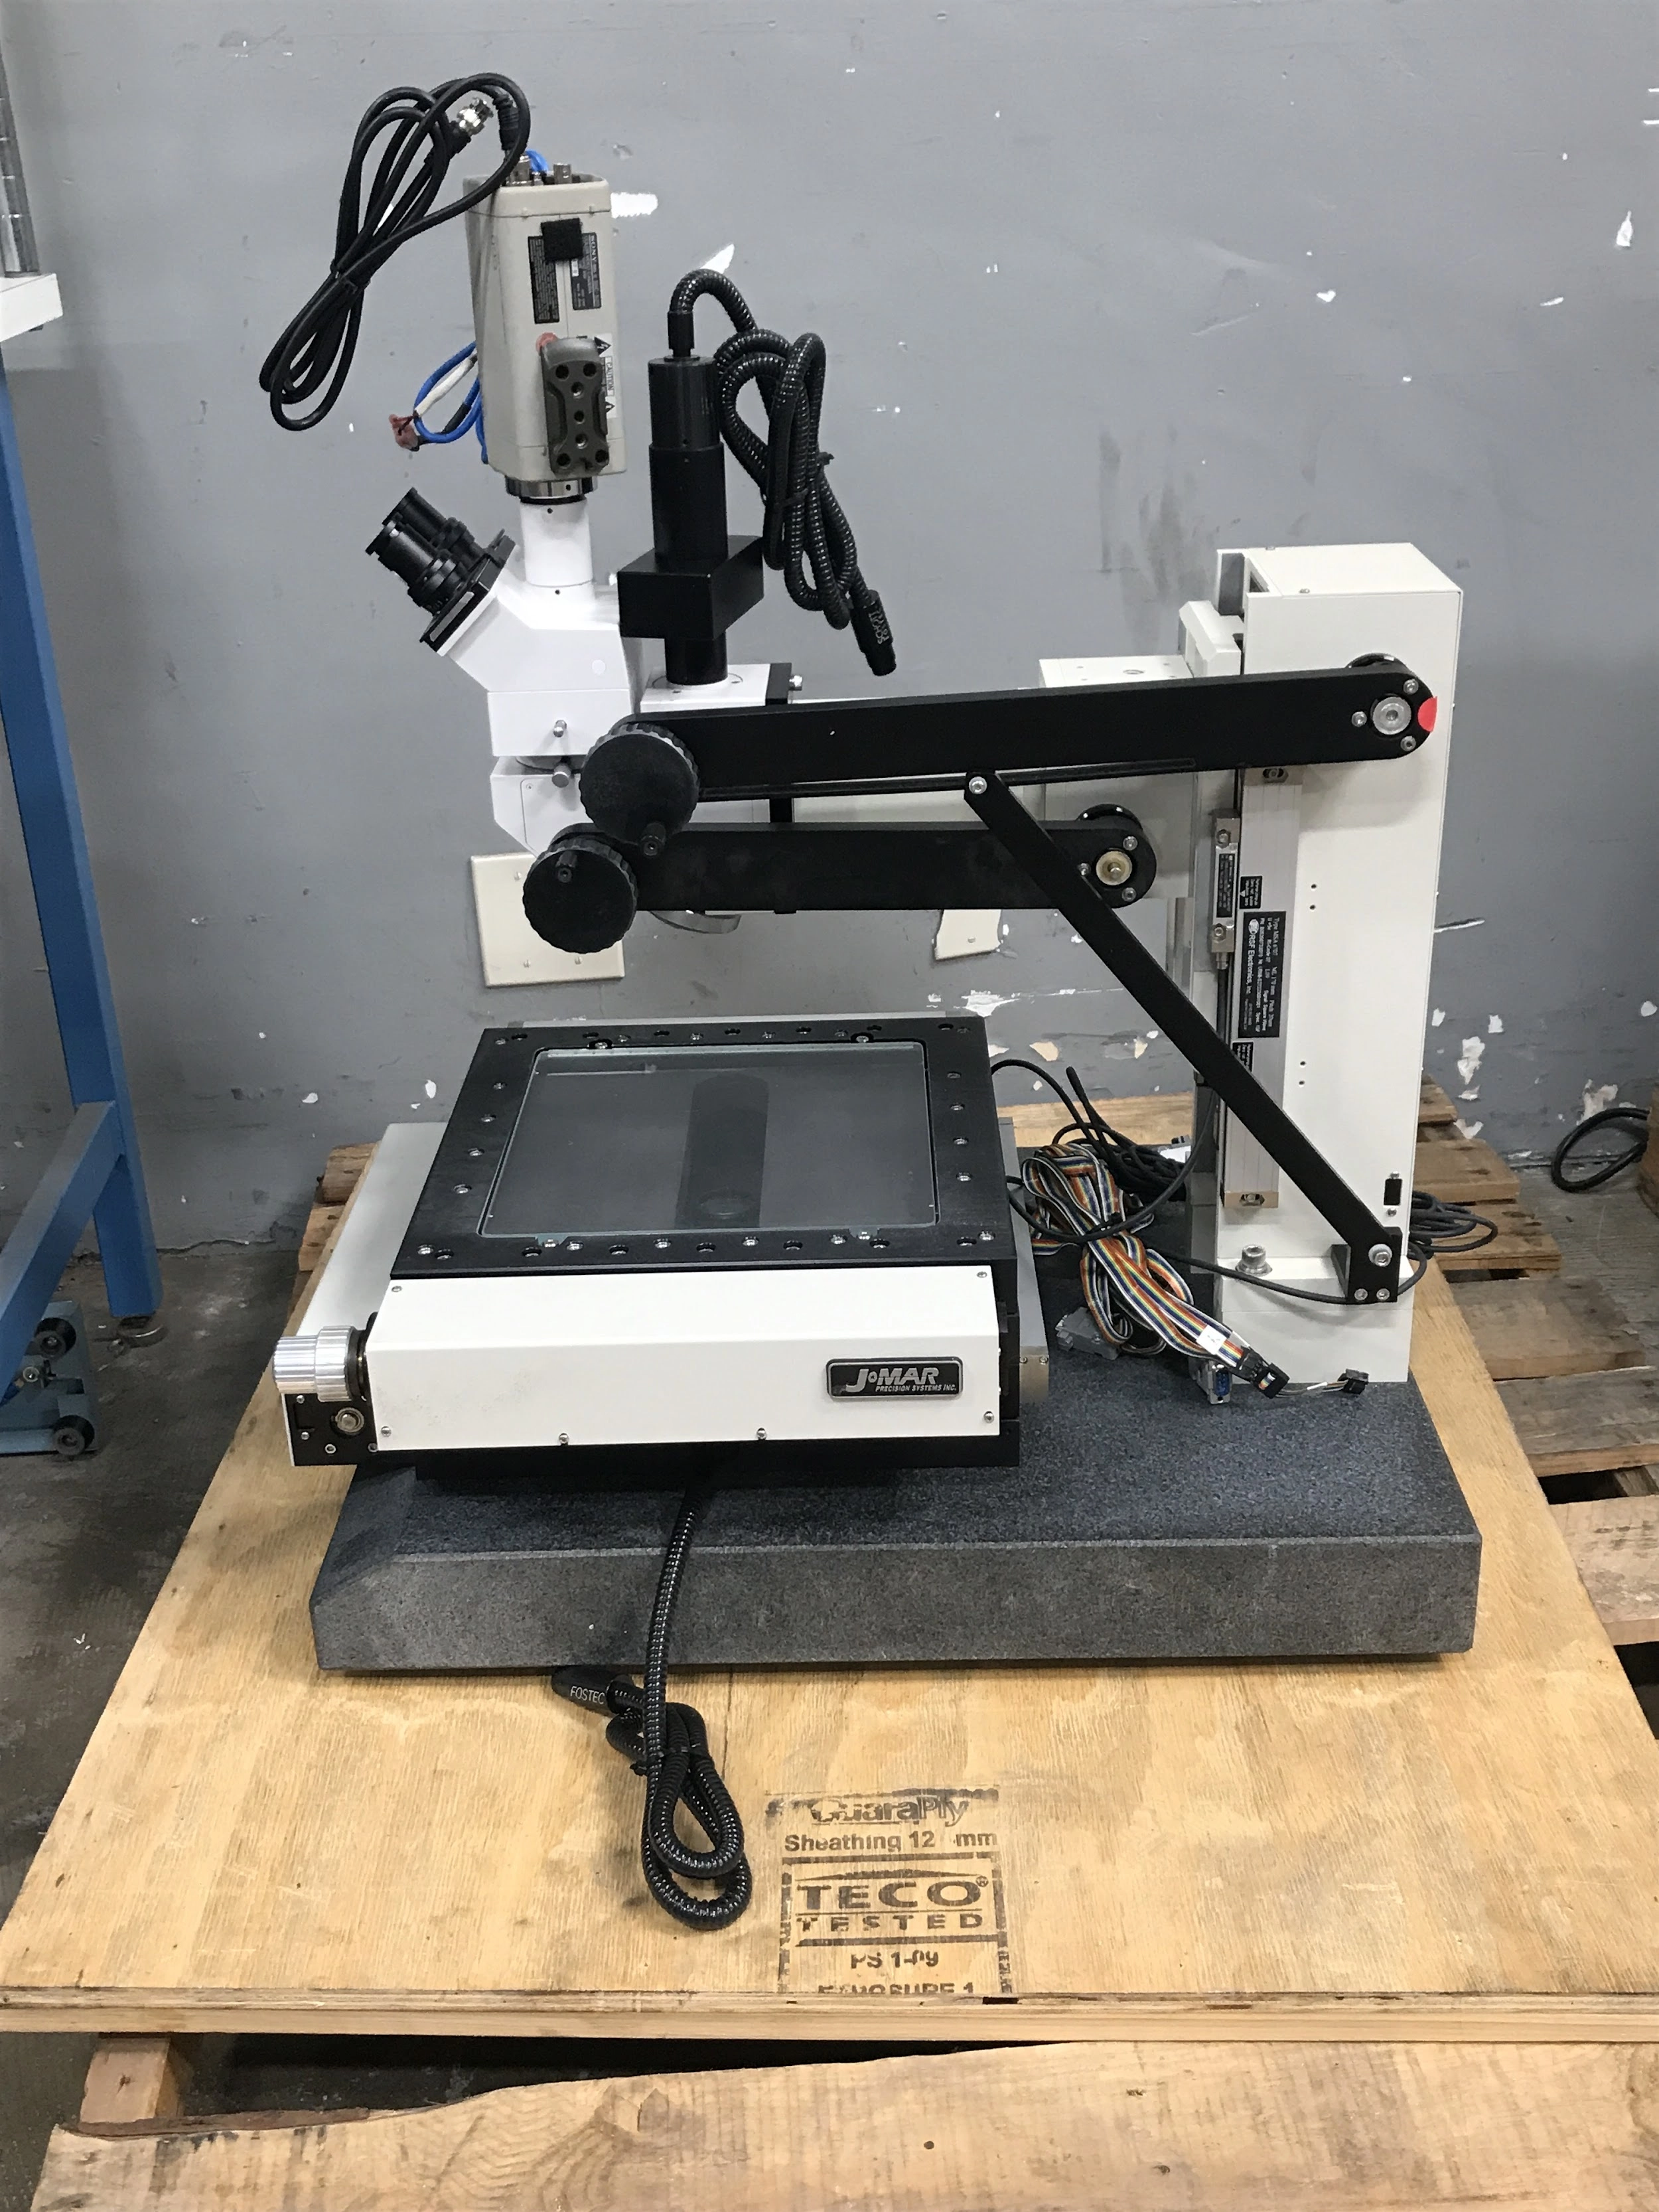 J-MAR Precision Systems ZScope Automated Microscope ZS-FBE ZSTG-KBE AS IS